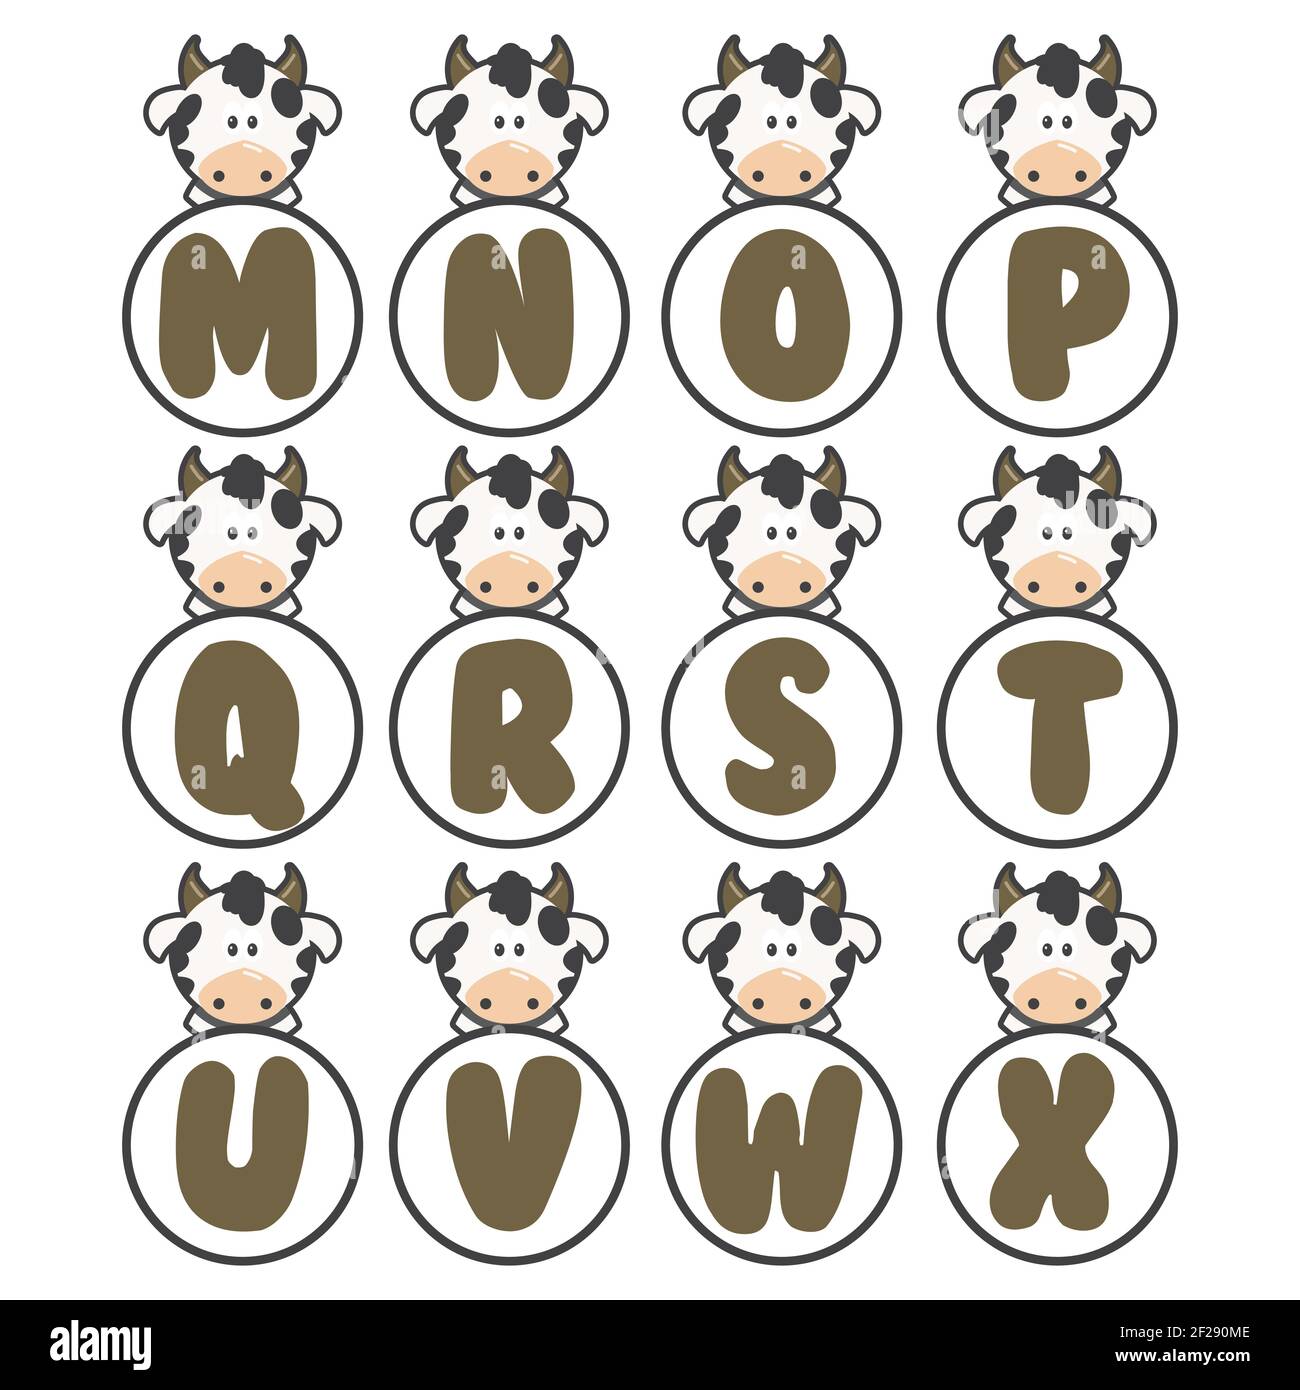 cow alphabet collection, vector art and illustration. Stock Vector